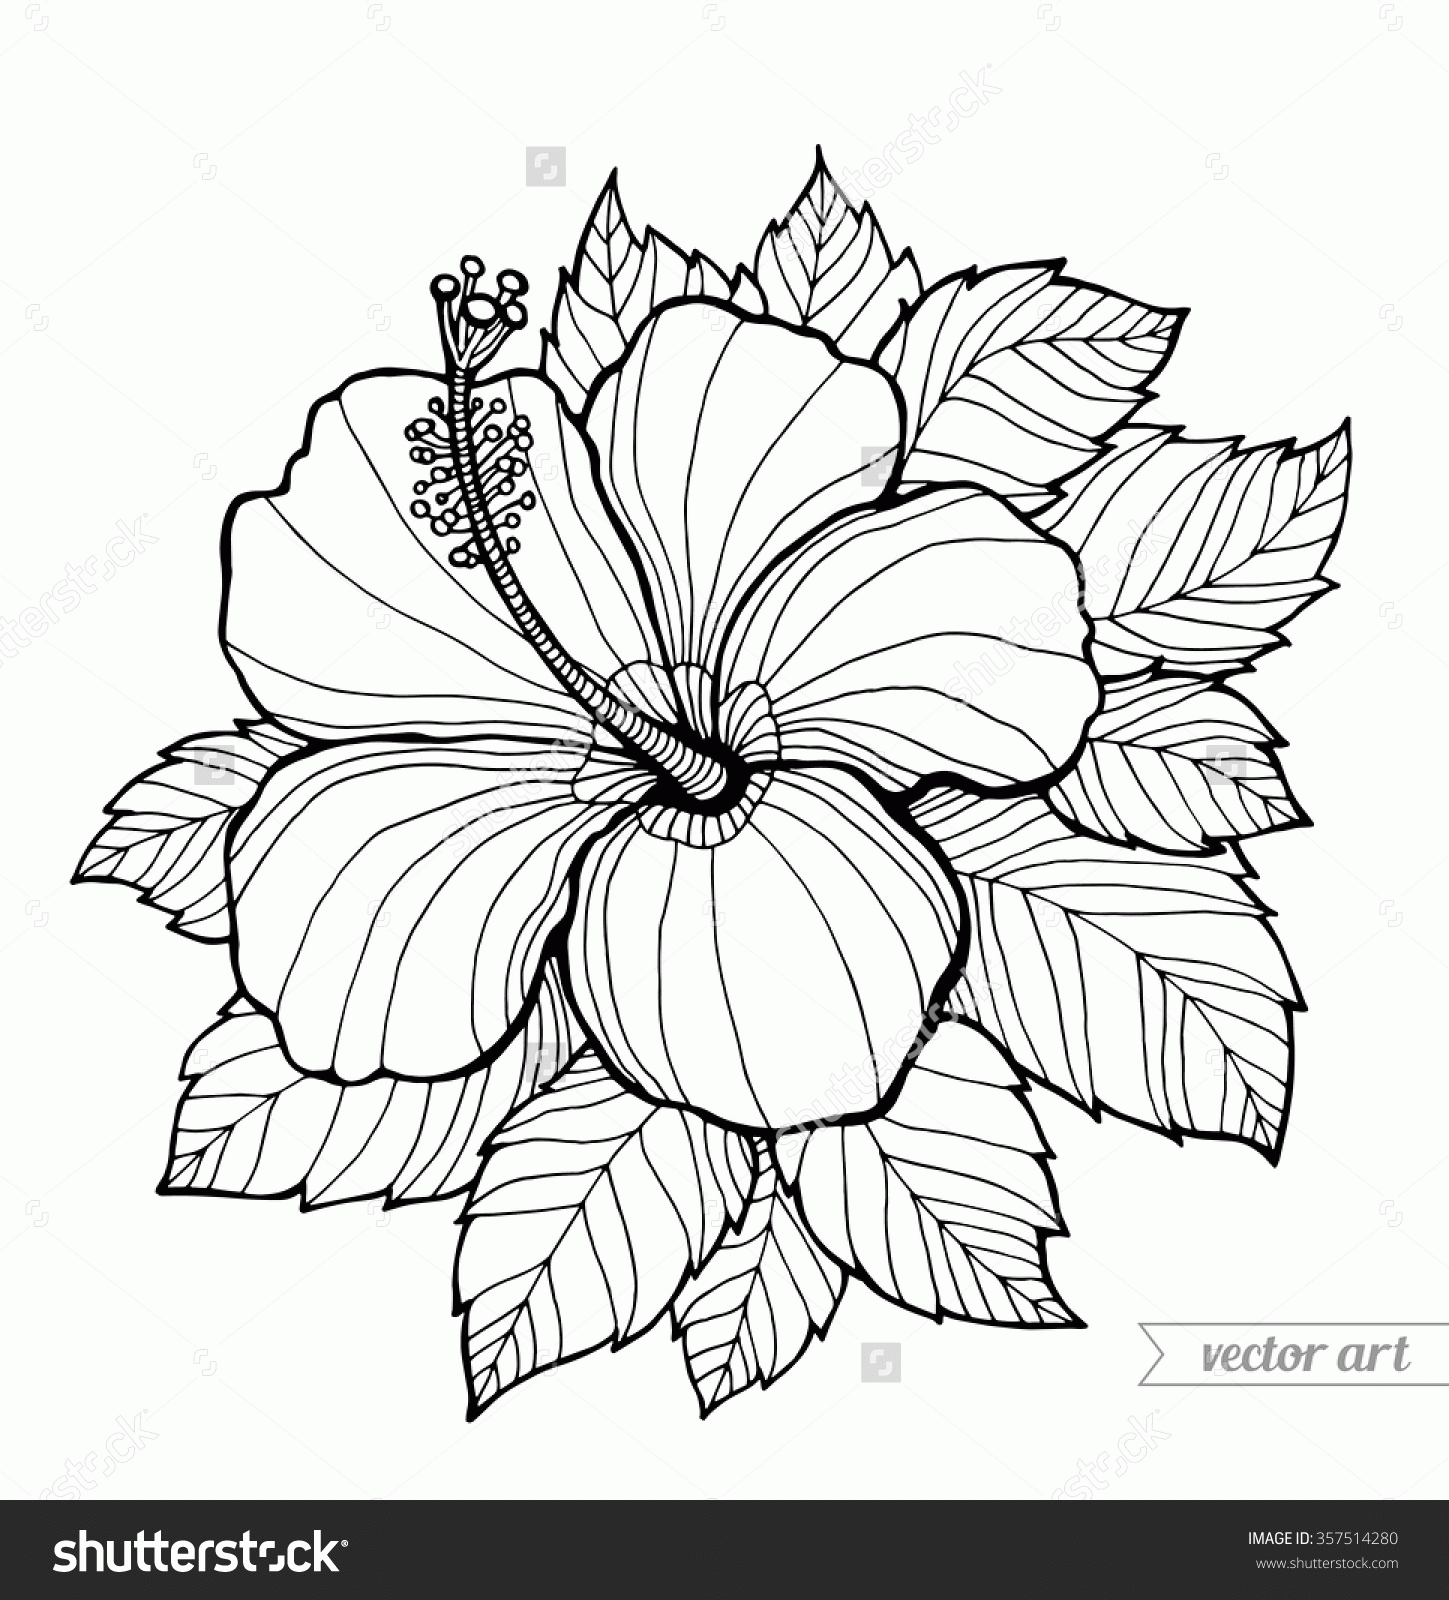 Download Free Coloring Pages Of Hibiscus Flowers - Coloring Home